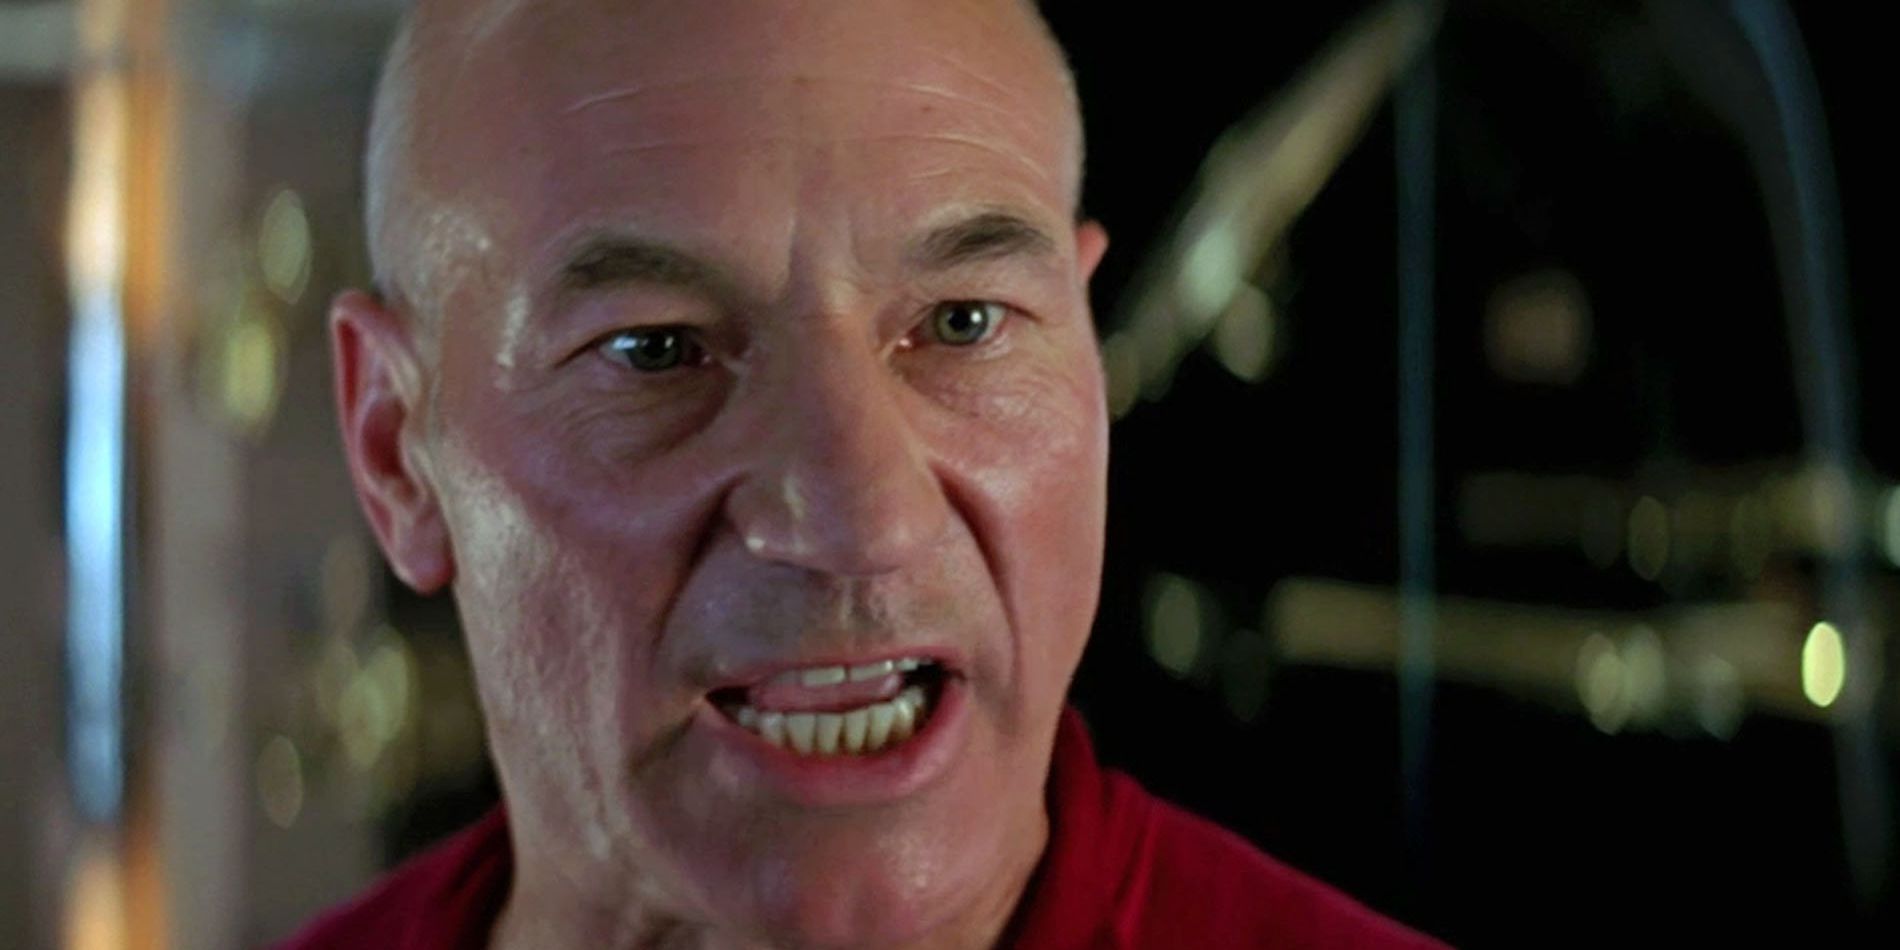 Picard rant in Star Trek First Contact